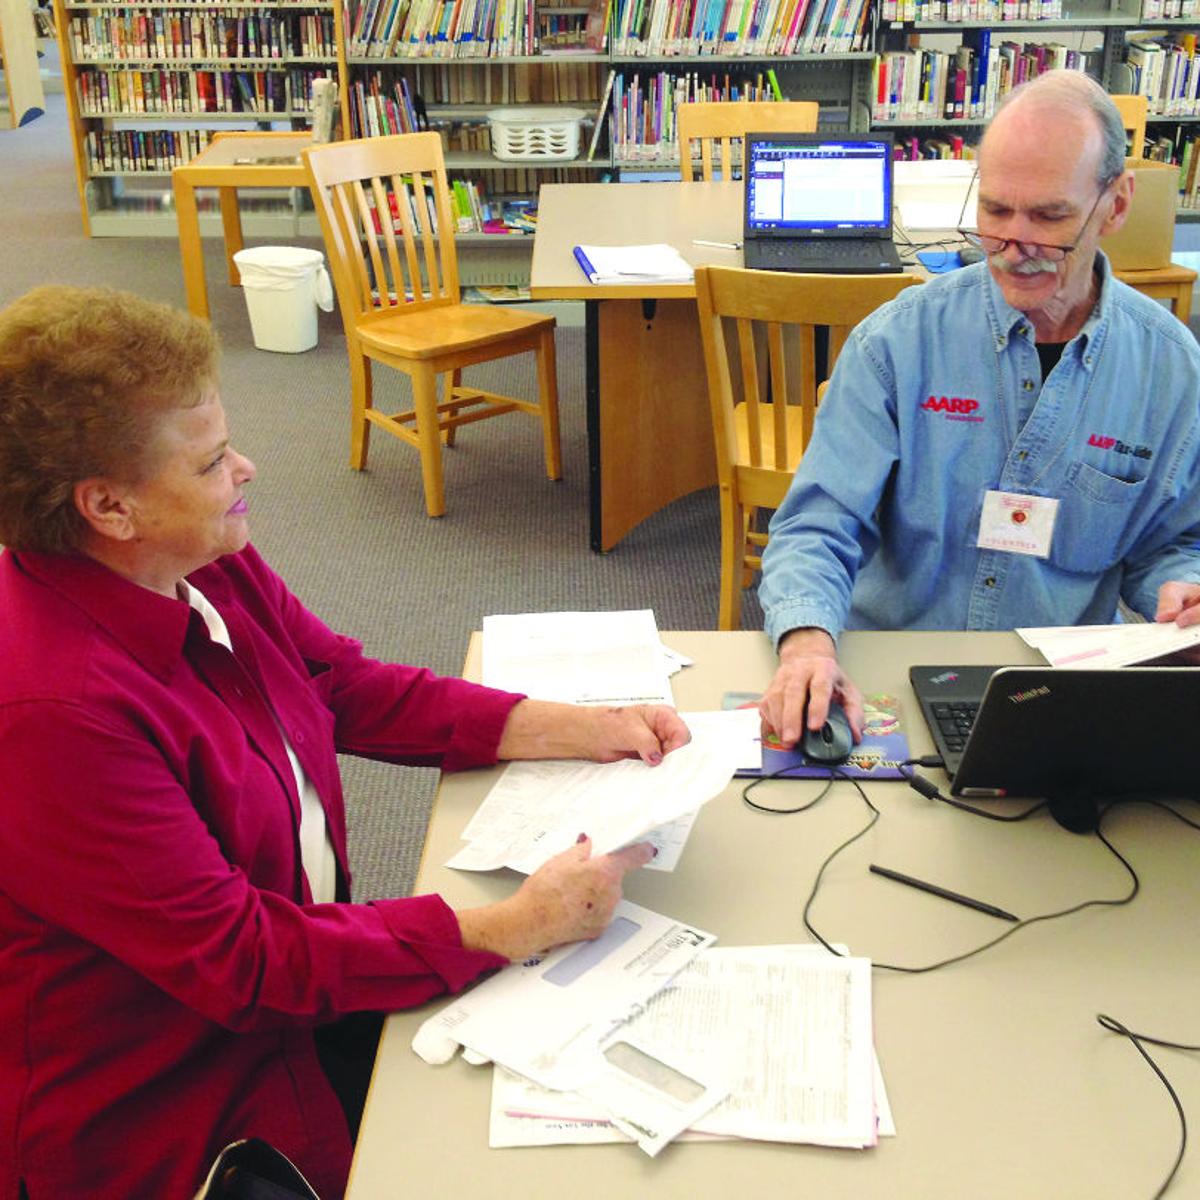 Tax Assistance Available From The Aarp At The Greenville Library